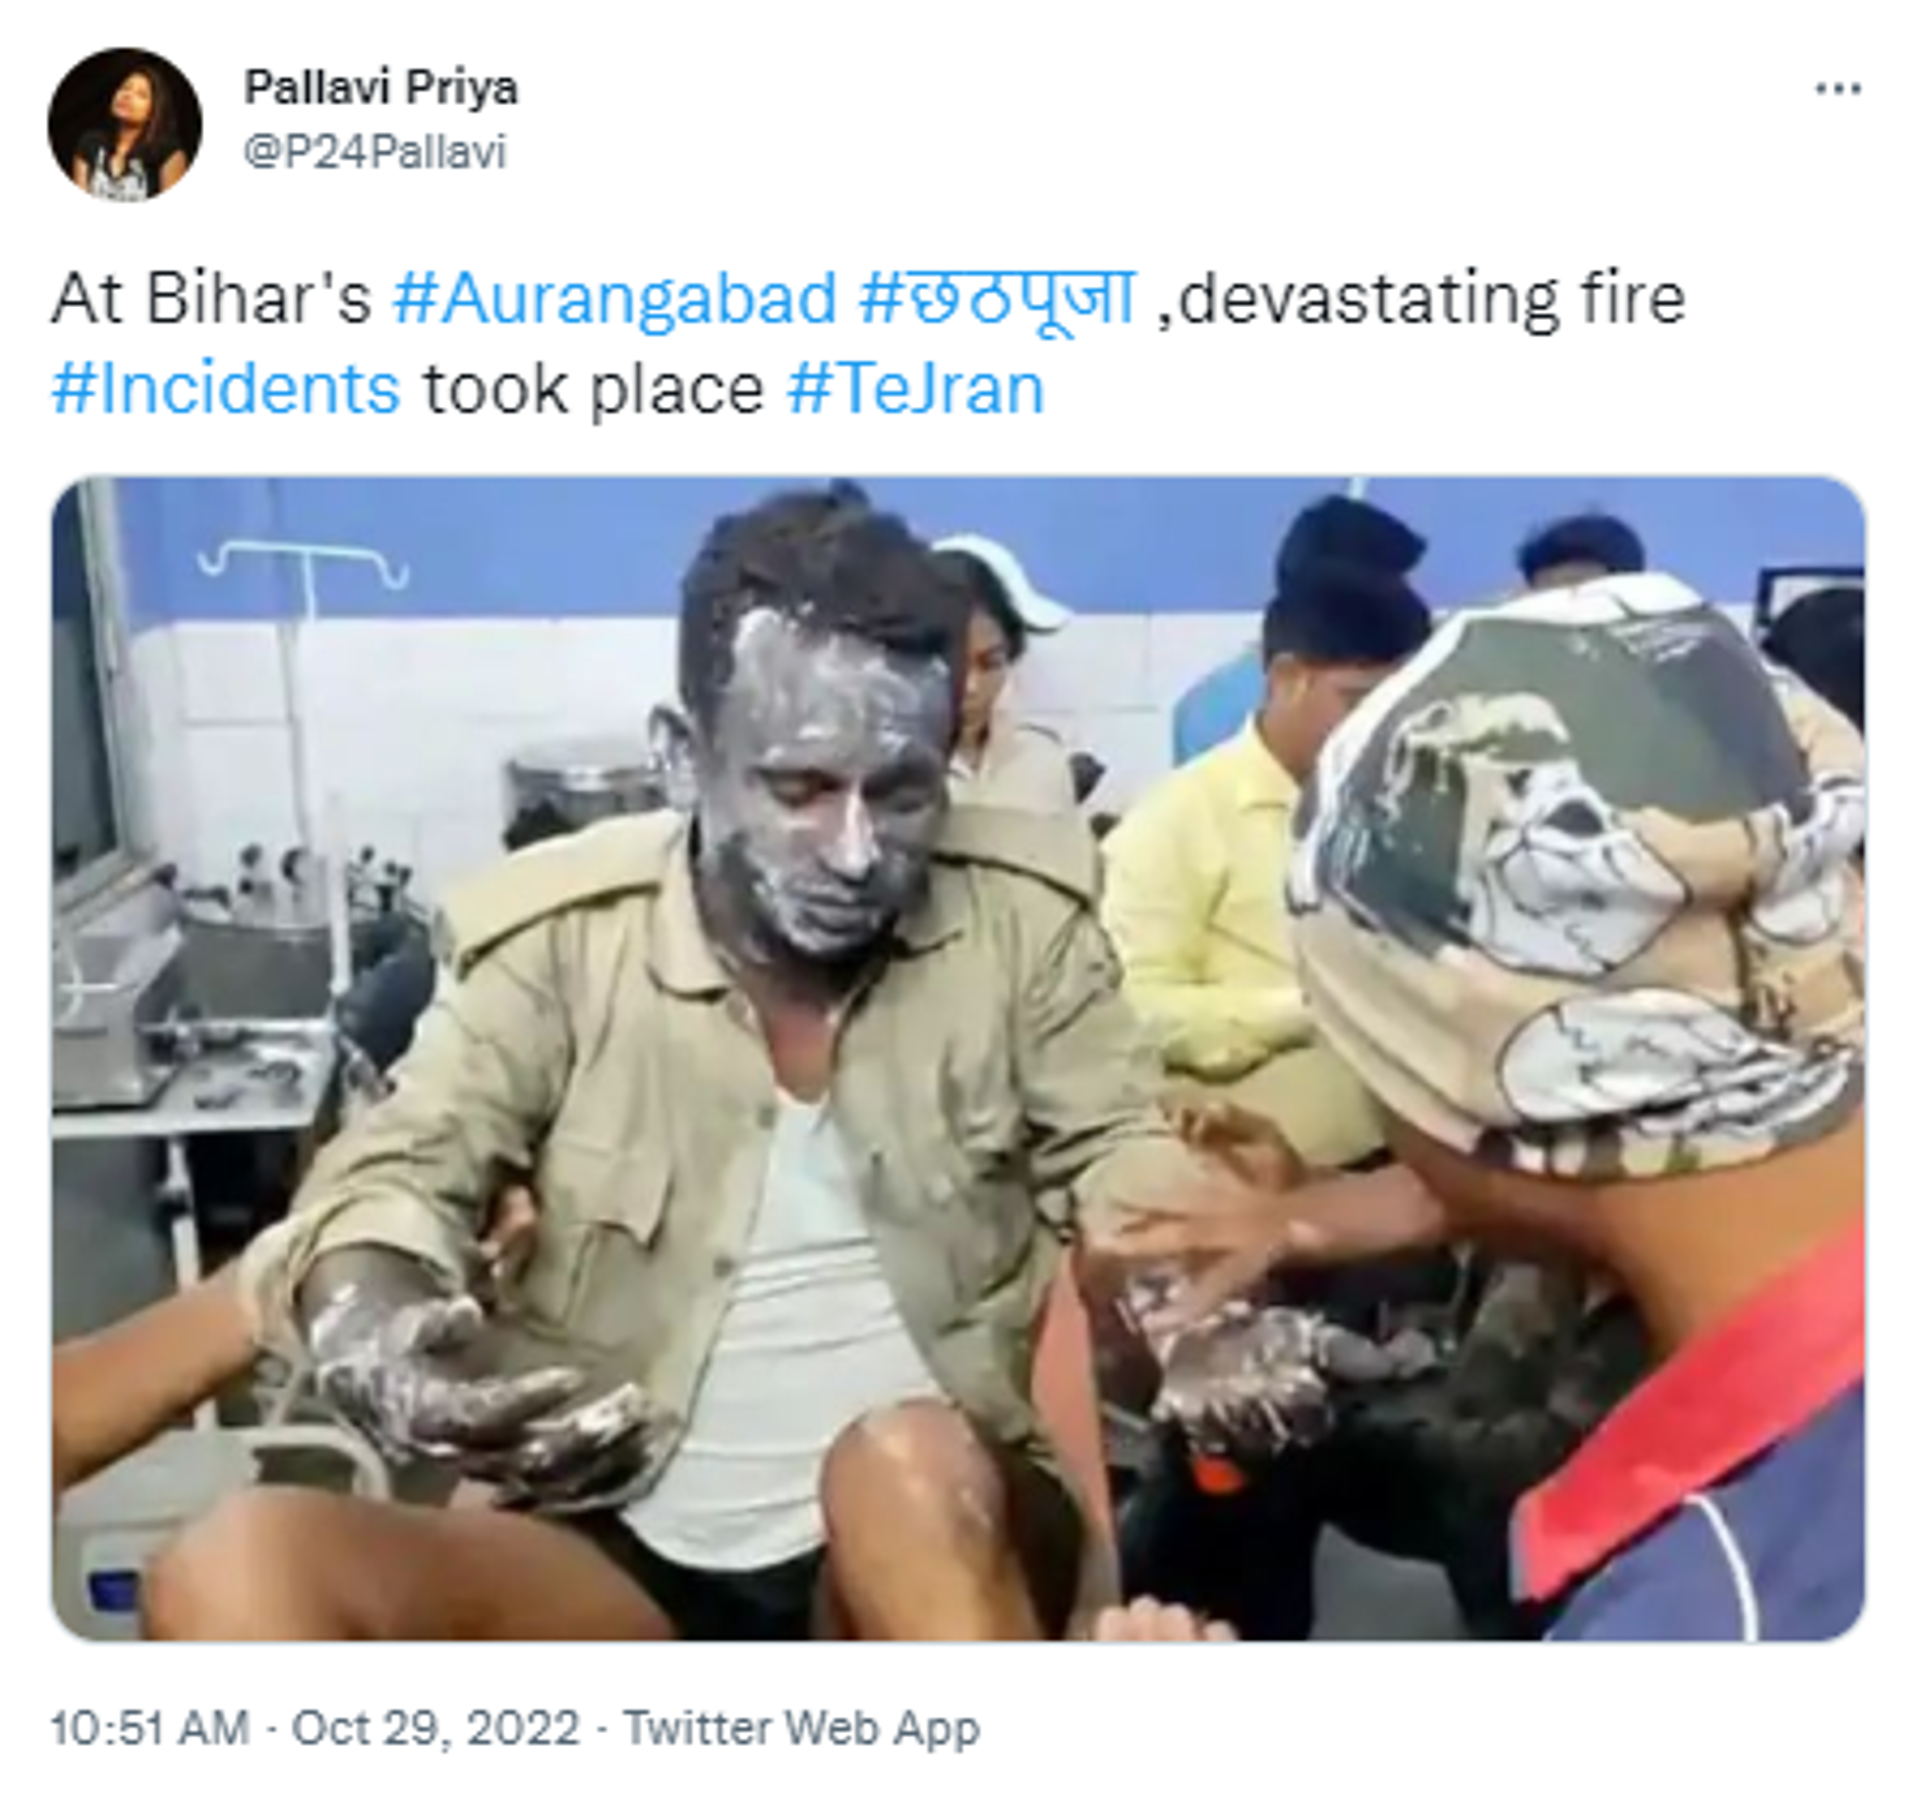 Screenshot of Twitter post of an injured man undergoing treatment after he suffered severe burns post gas cylinder blasted in India's Bihar state - Sputnik International, 1920, 29.10.2022